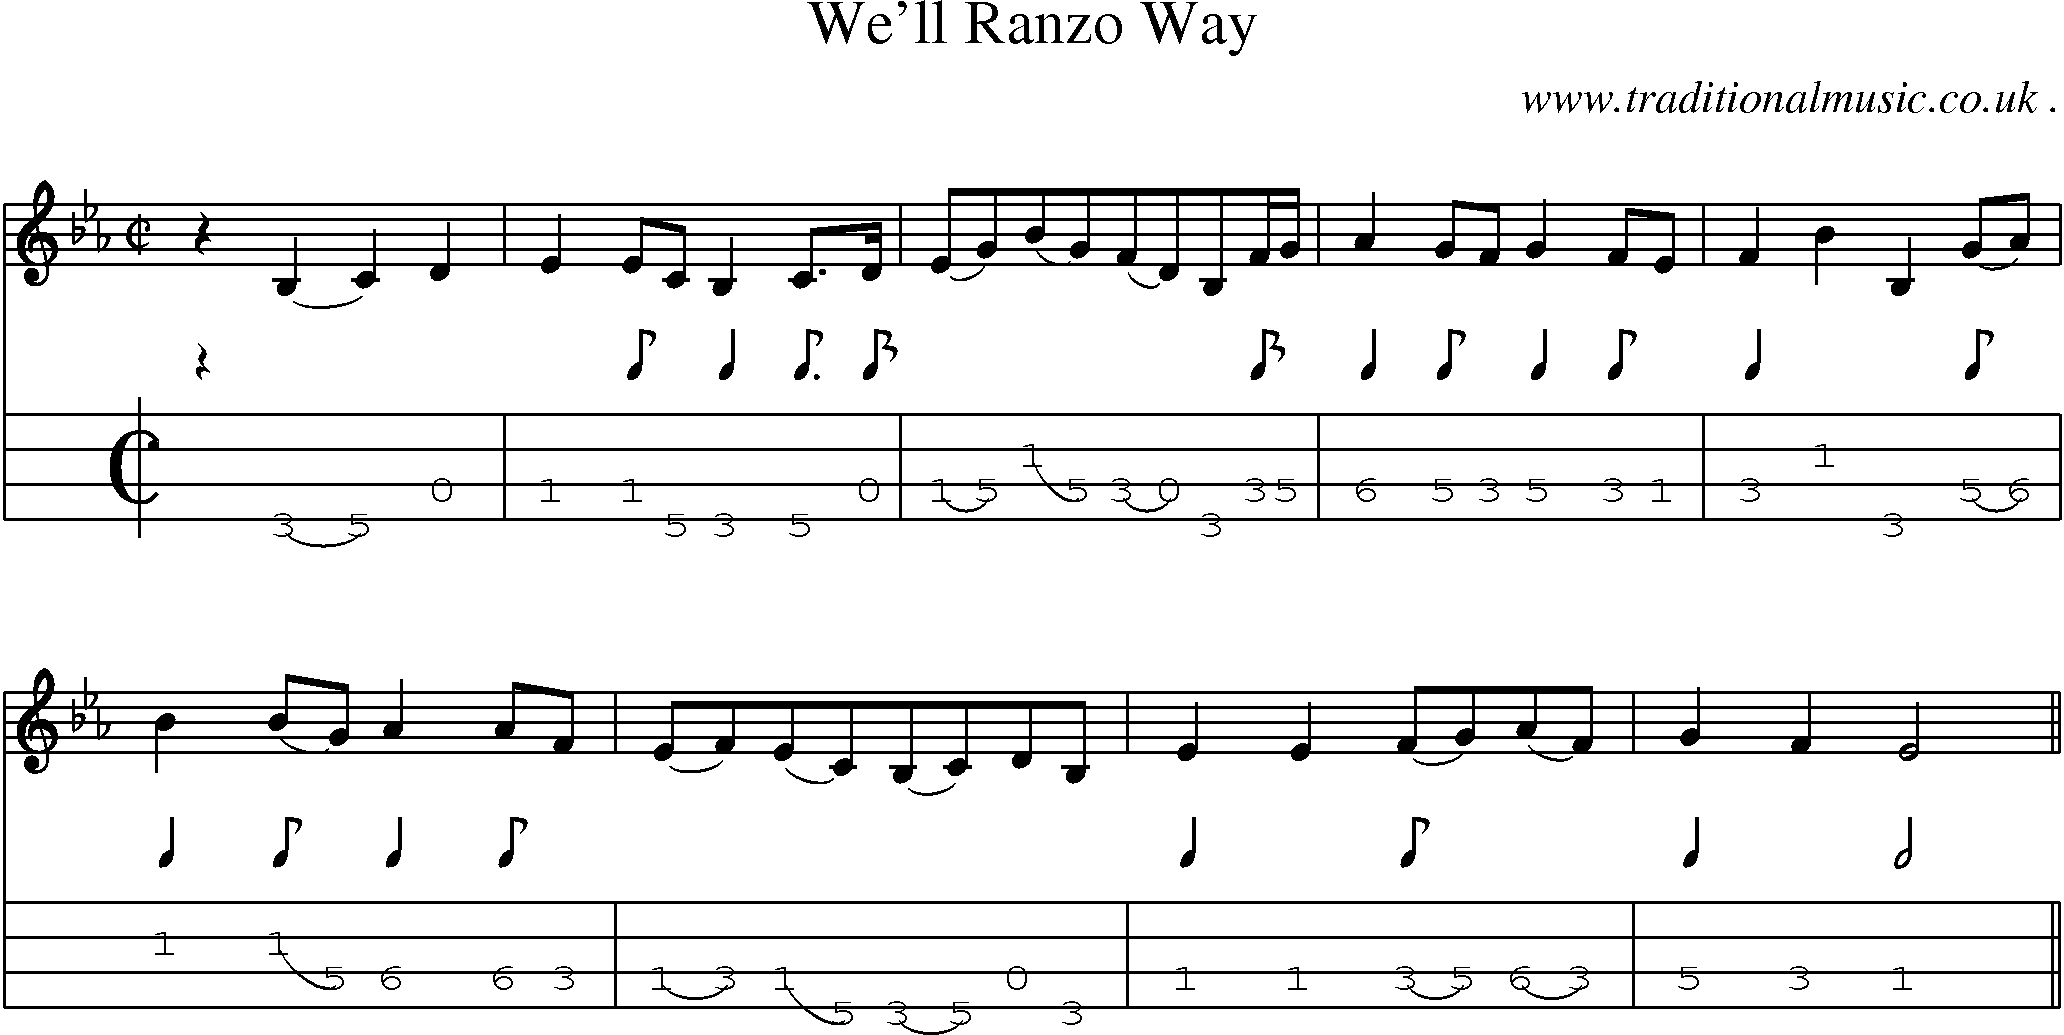 Sheet-Music and Mandolin Tabs for Well Ranzo Way